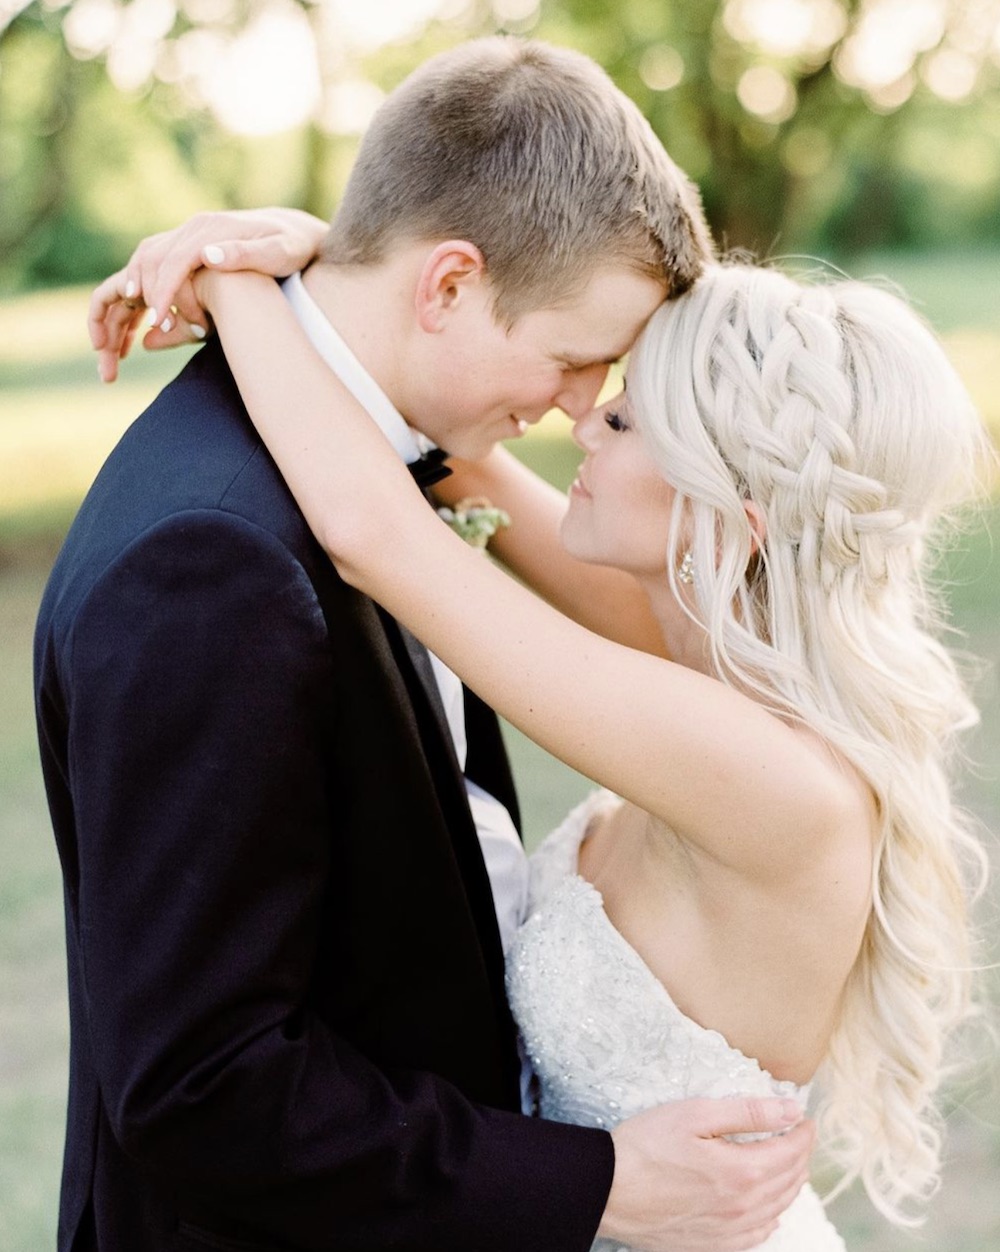 Mackenzie Reiter and husband sharing a hug and pressing their foreheads against each other on their wedding day 